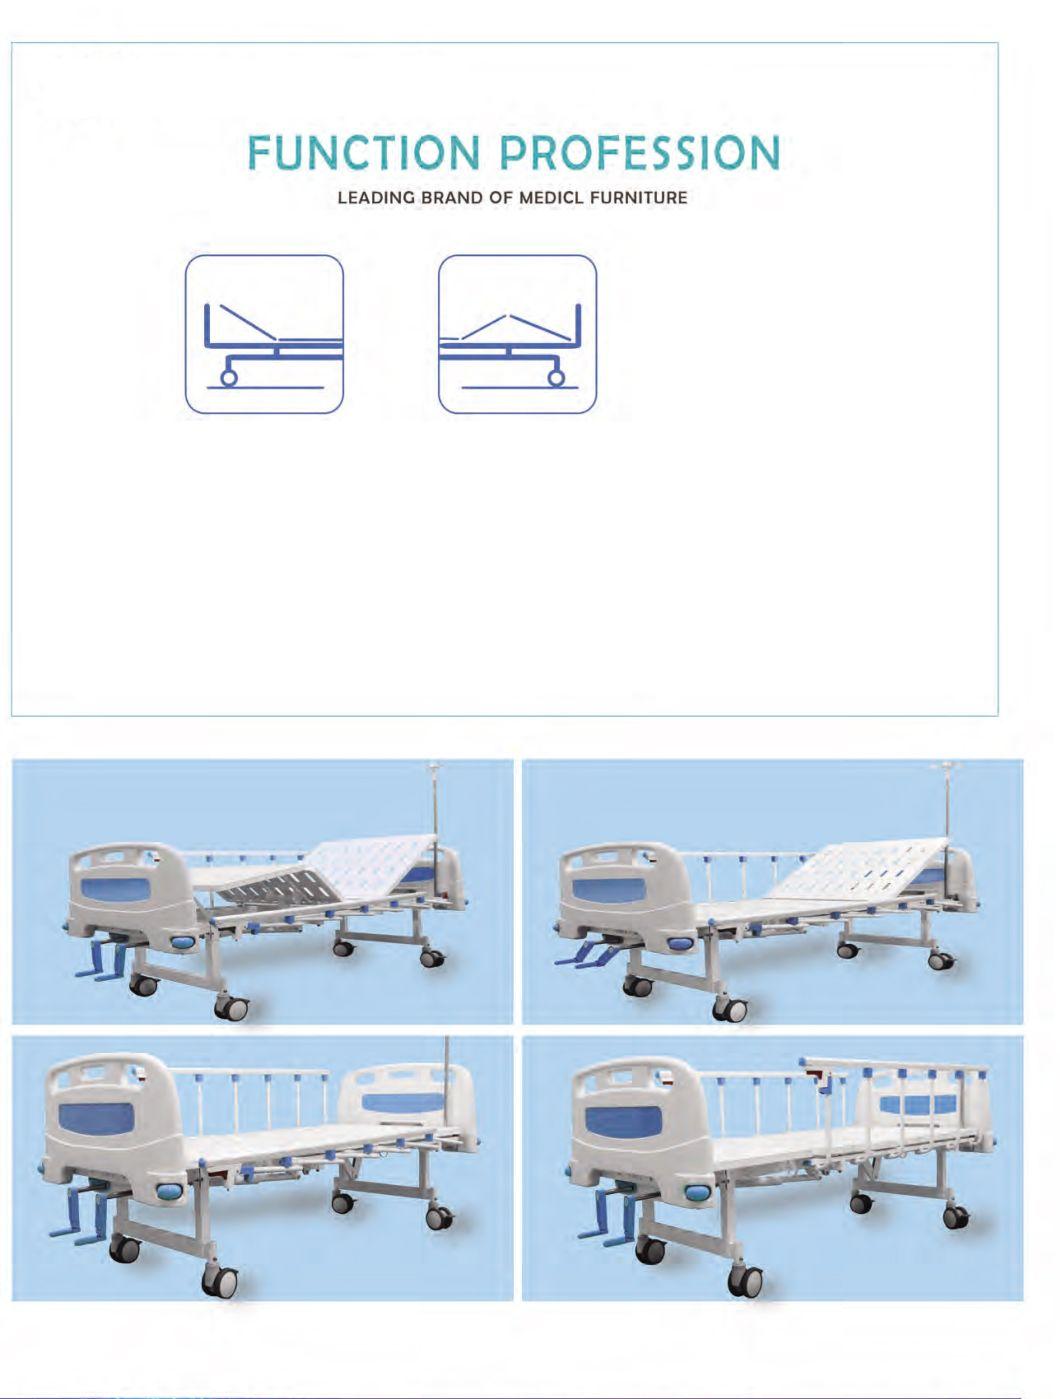 Chinese Supplier Two Function Stainless Steel Hospital Beds Manual 2 Cranks